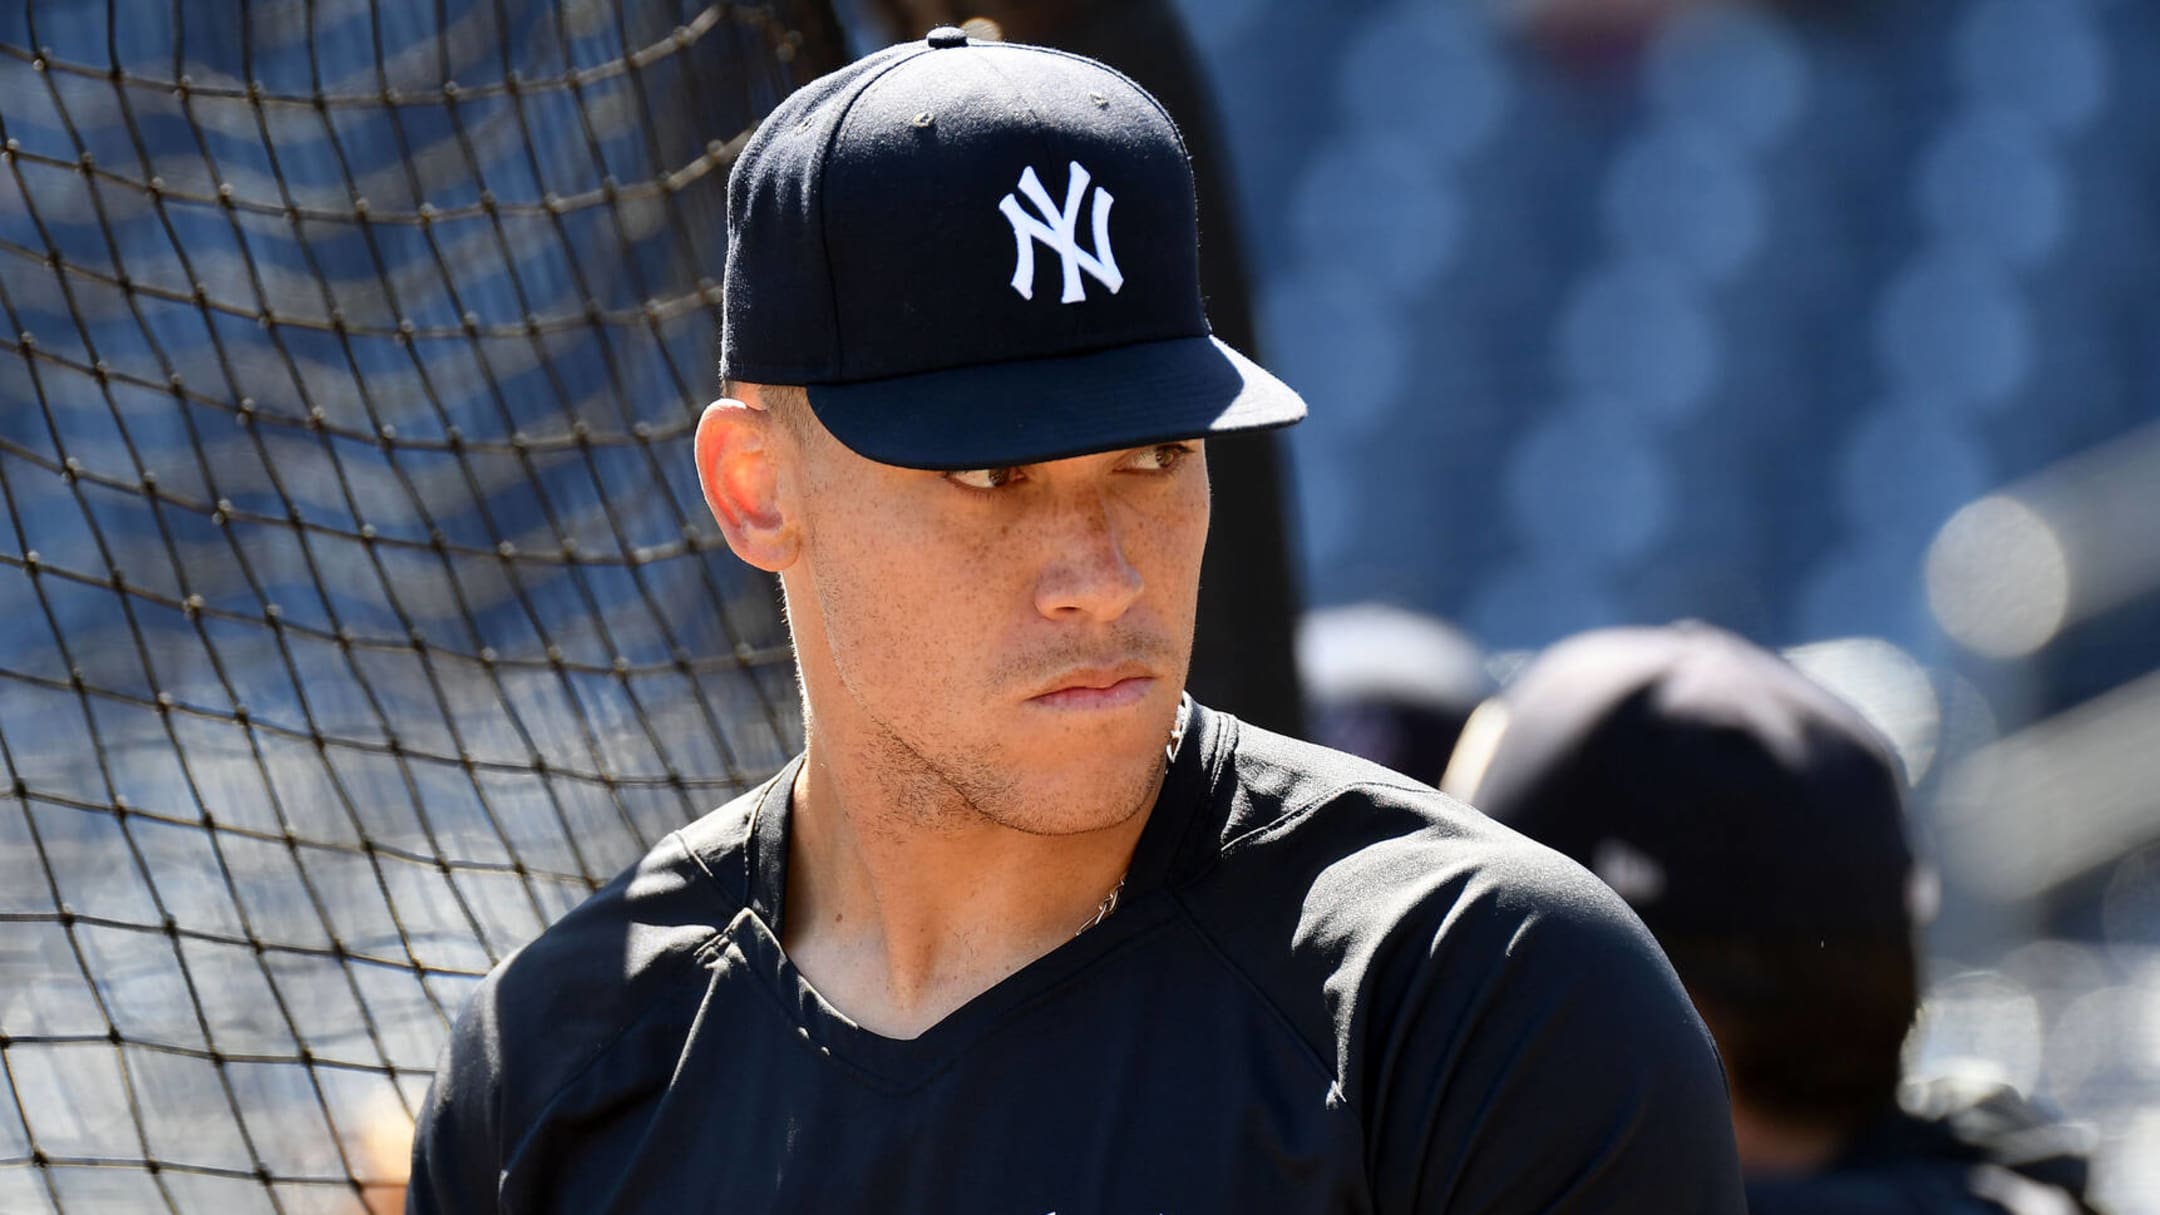 The Yankees must extend both Aaron Judge and Joey Gallo